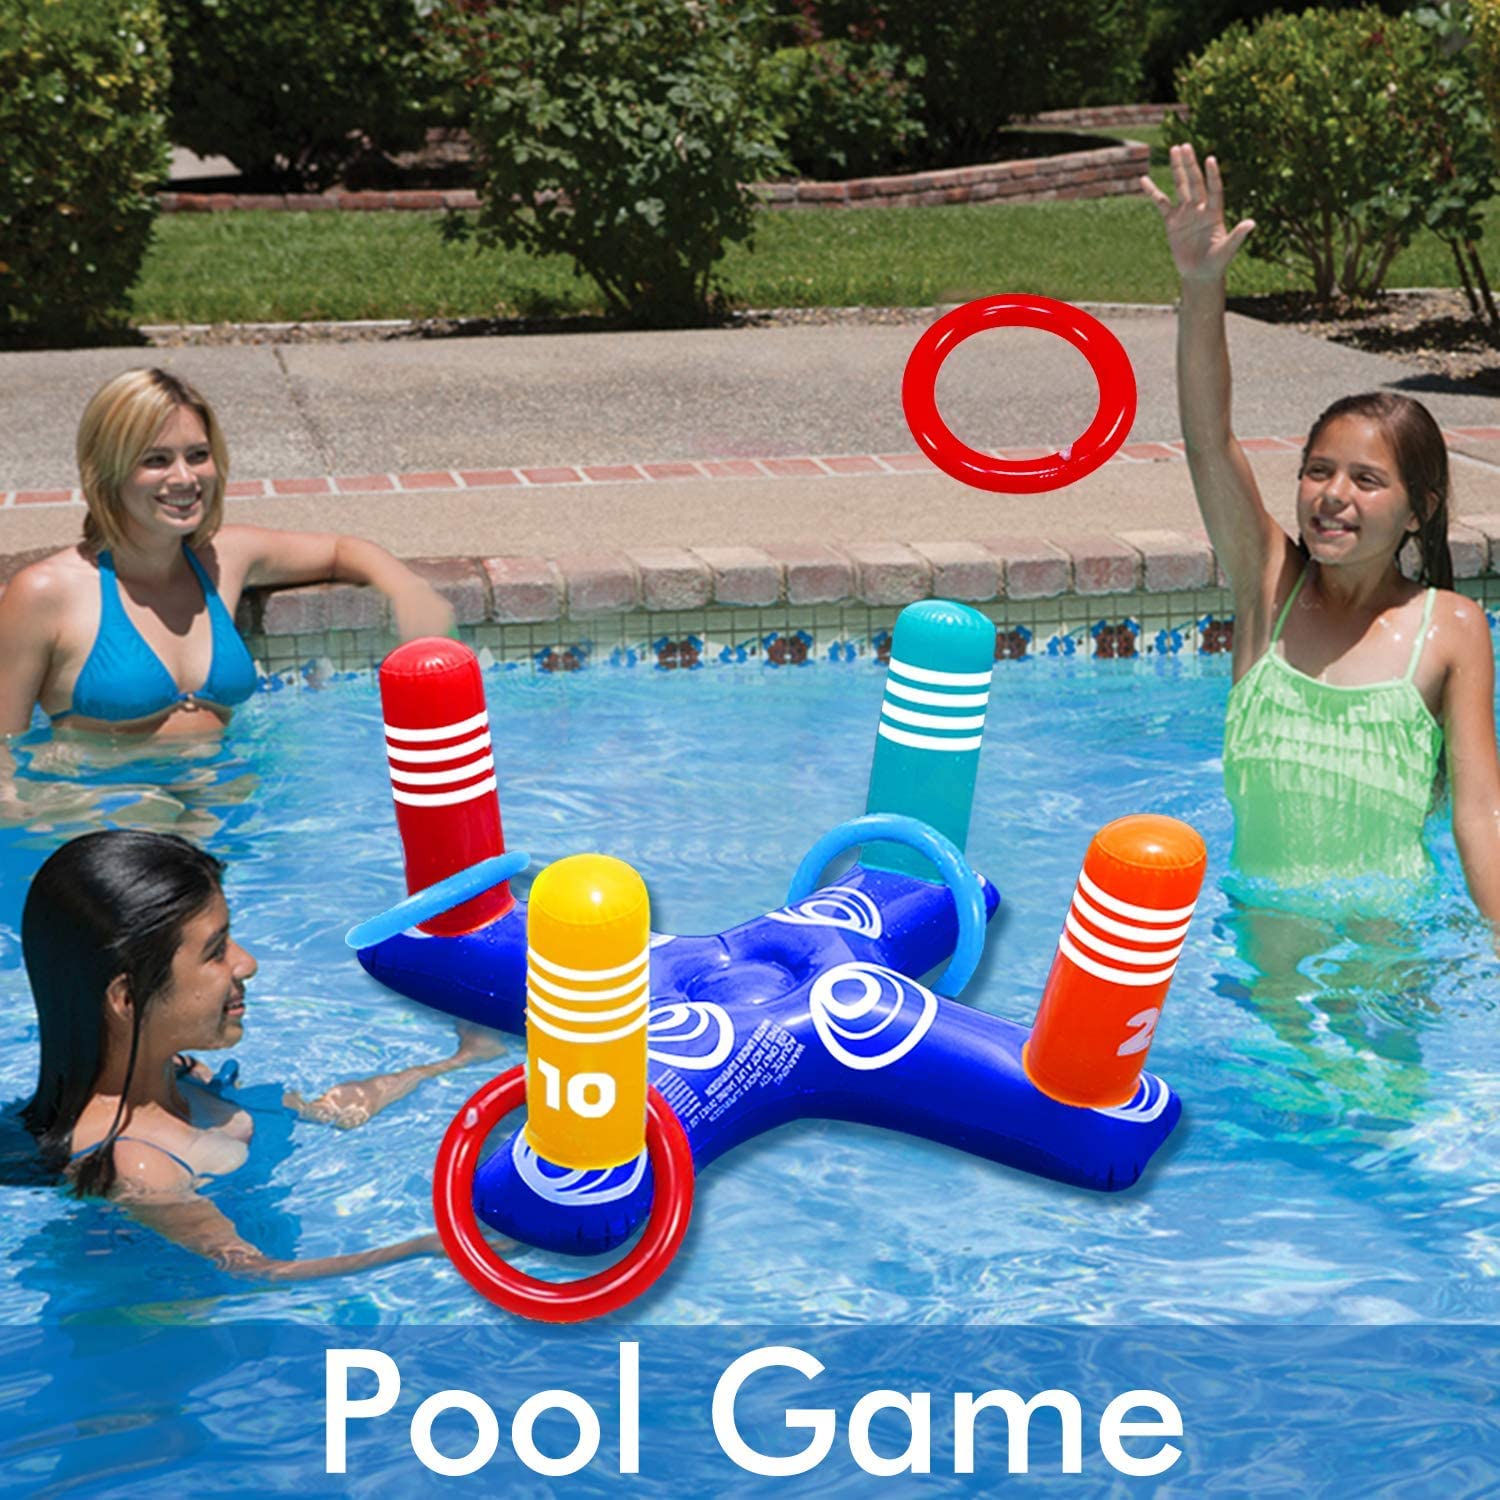 Inflatable Pool Ring Toss Pool Game Toys, Floating Swimming Pool Ring with 4 Pcs Rings